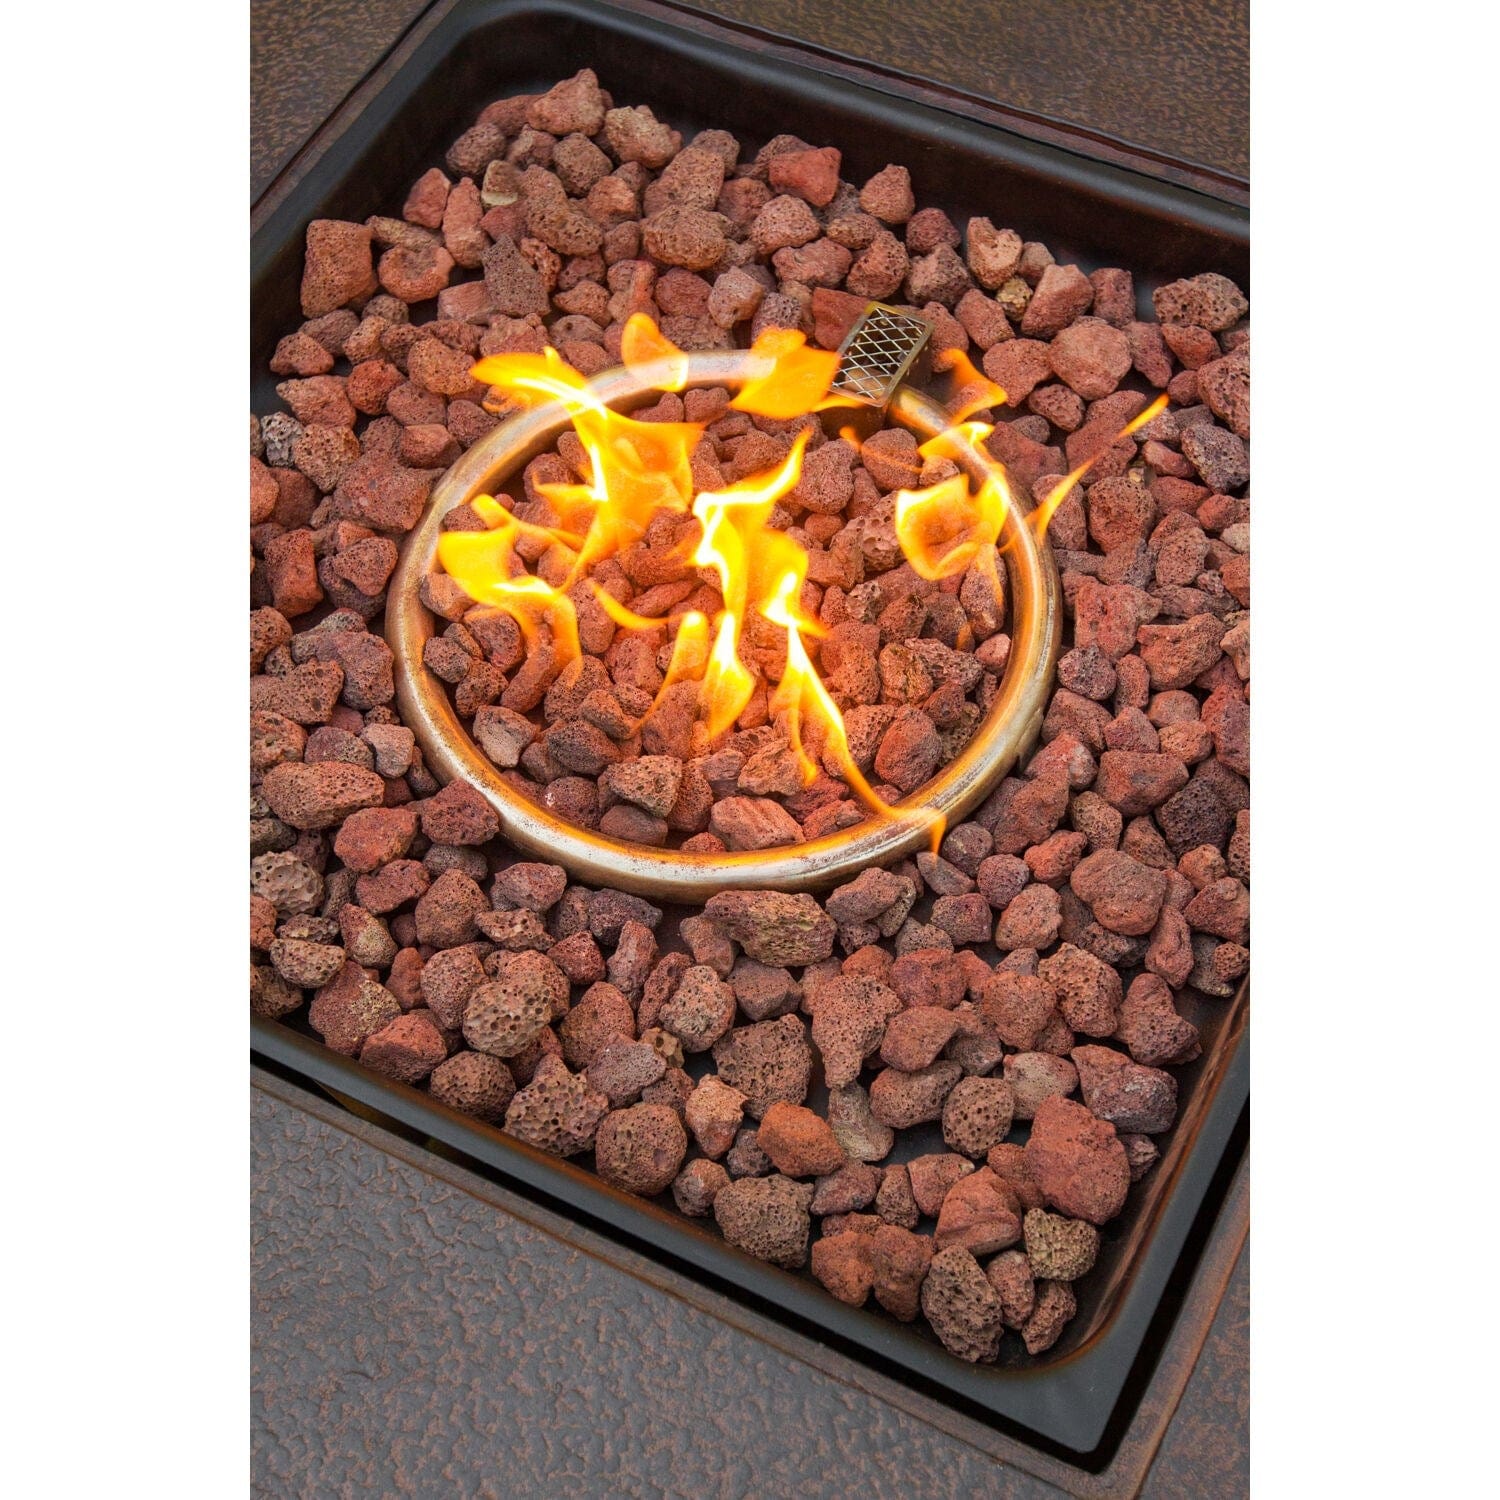 Hanover Fire Pit Chat Set Hanover - Traditions 5-Piece Aluminum Frame Fire Pit Chat Set in Red with 4 Swivel Rockers and a Durastone Fire Pit Table| Red/Bronze  | TRAD5PCDSW4FP-RED